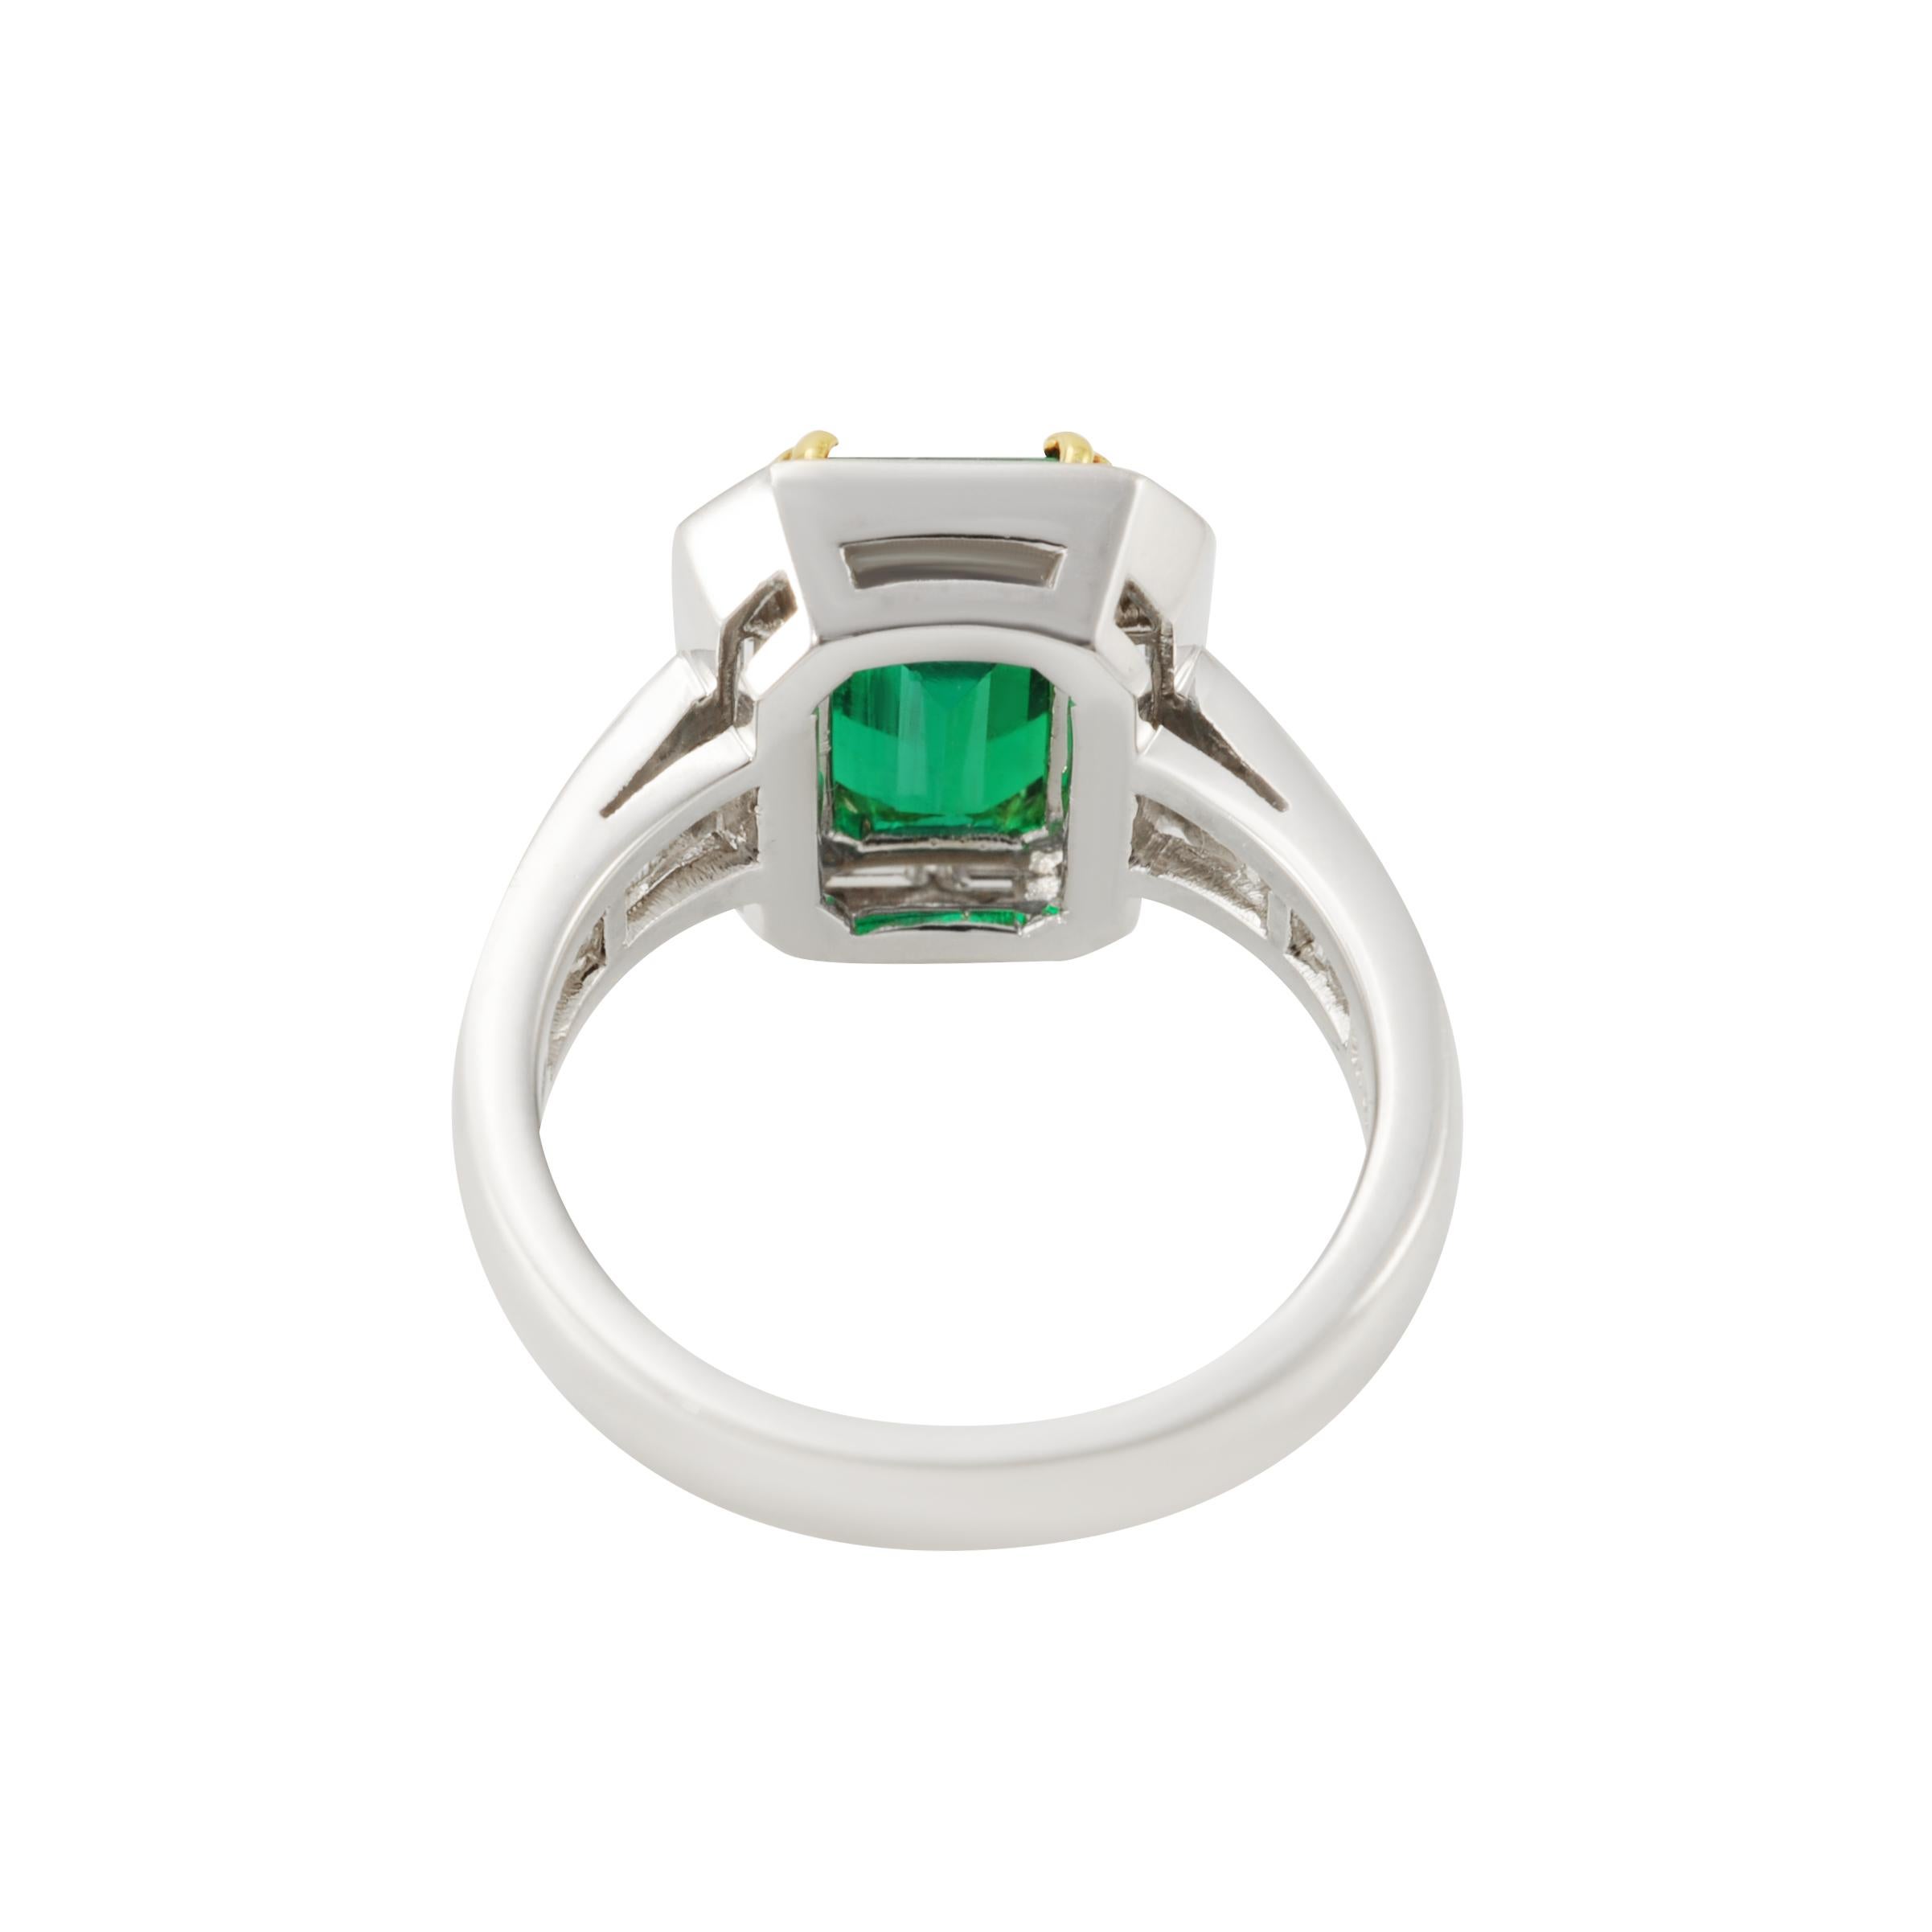 A fine octagonal emerald ring, its noble outline traced in baguette diamonds enriching the shank as well. 
Baguette Diamonds 1.82 carat Colour F-G / Clarity VVS
1 Octagonal Emerald 2.62 carat Gubelin Report: Origin Madascar 
US ring size 6-1/2
Each